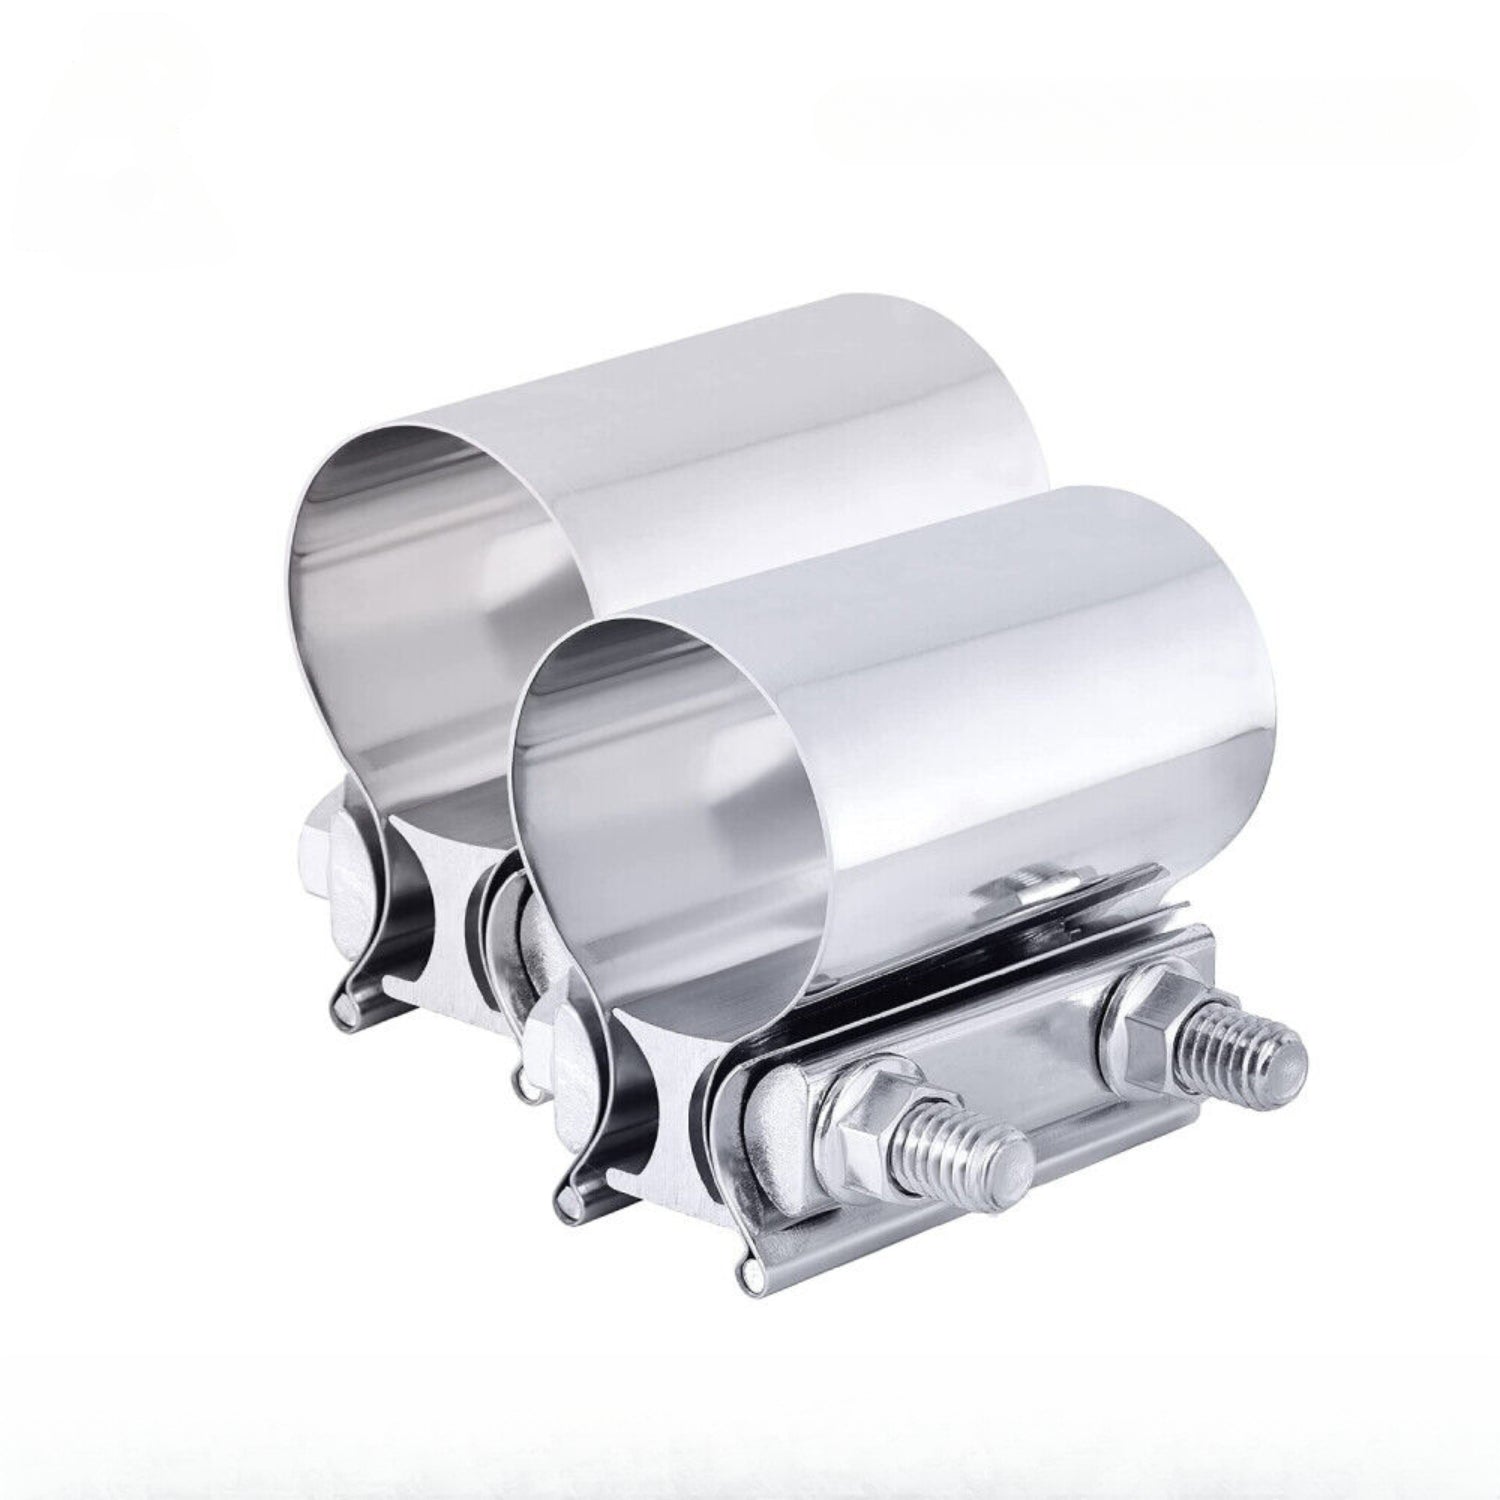 2" Butt Joint Exhaust Band Clamp Muffler Sleeve Coupler Stainless Steel 2 Pack